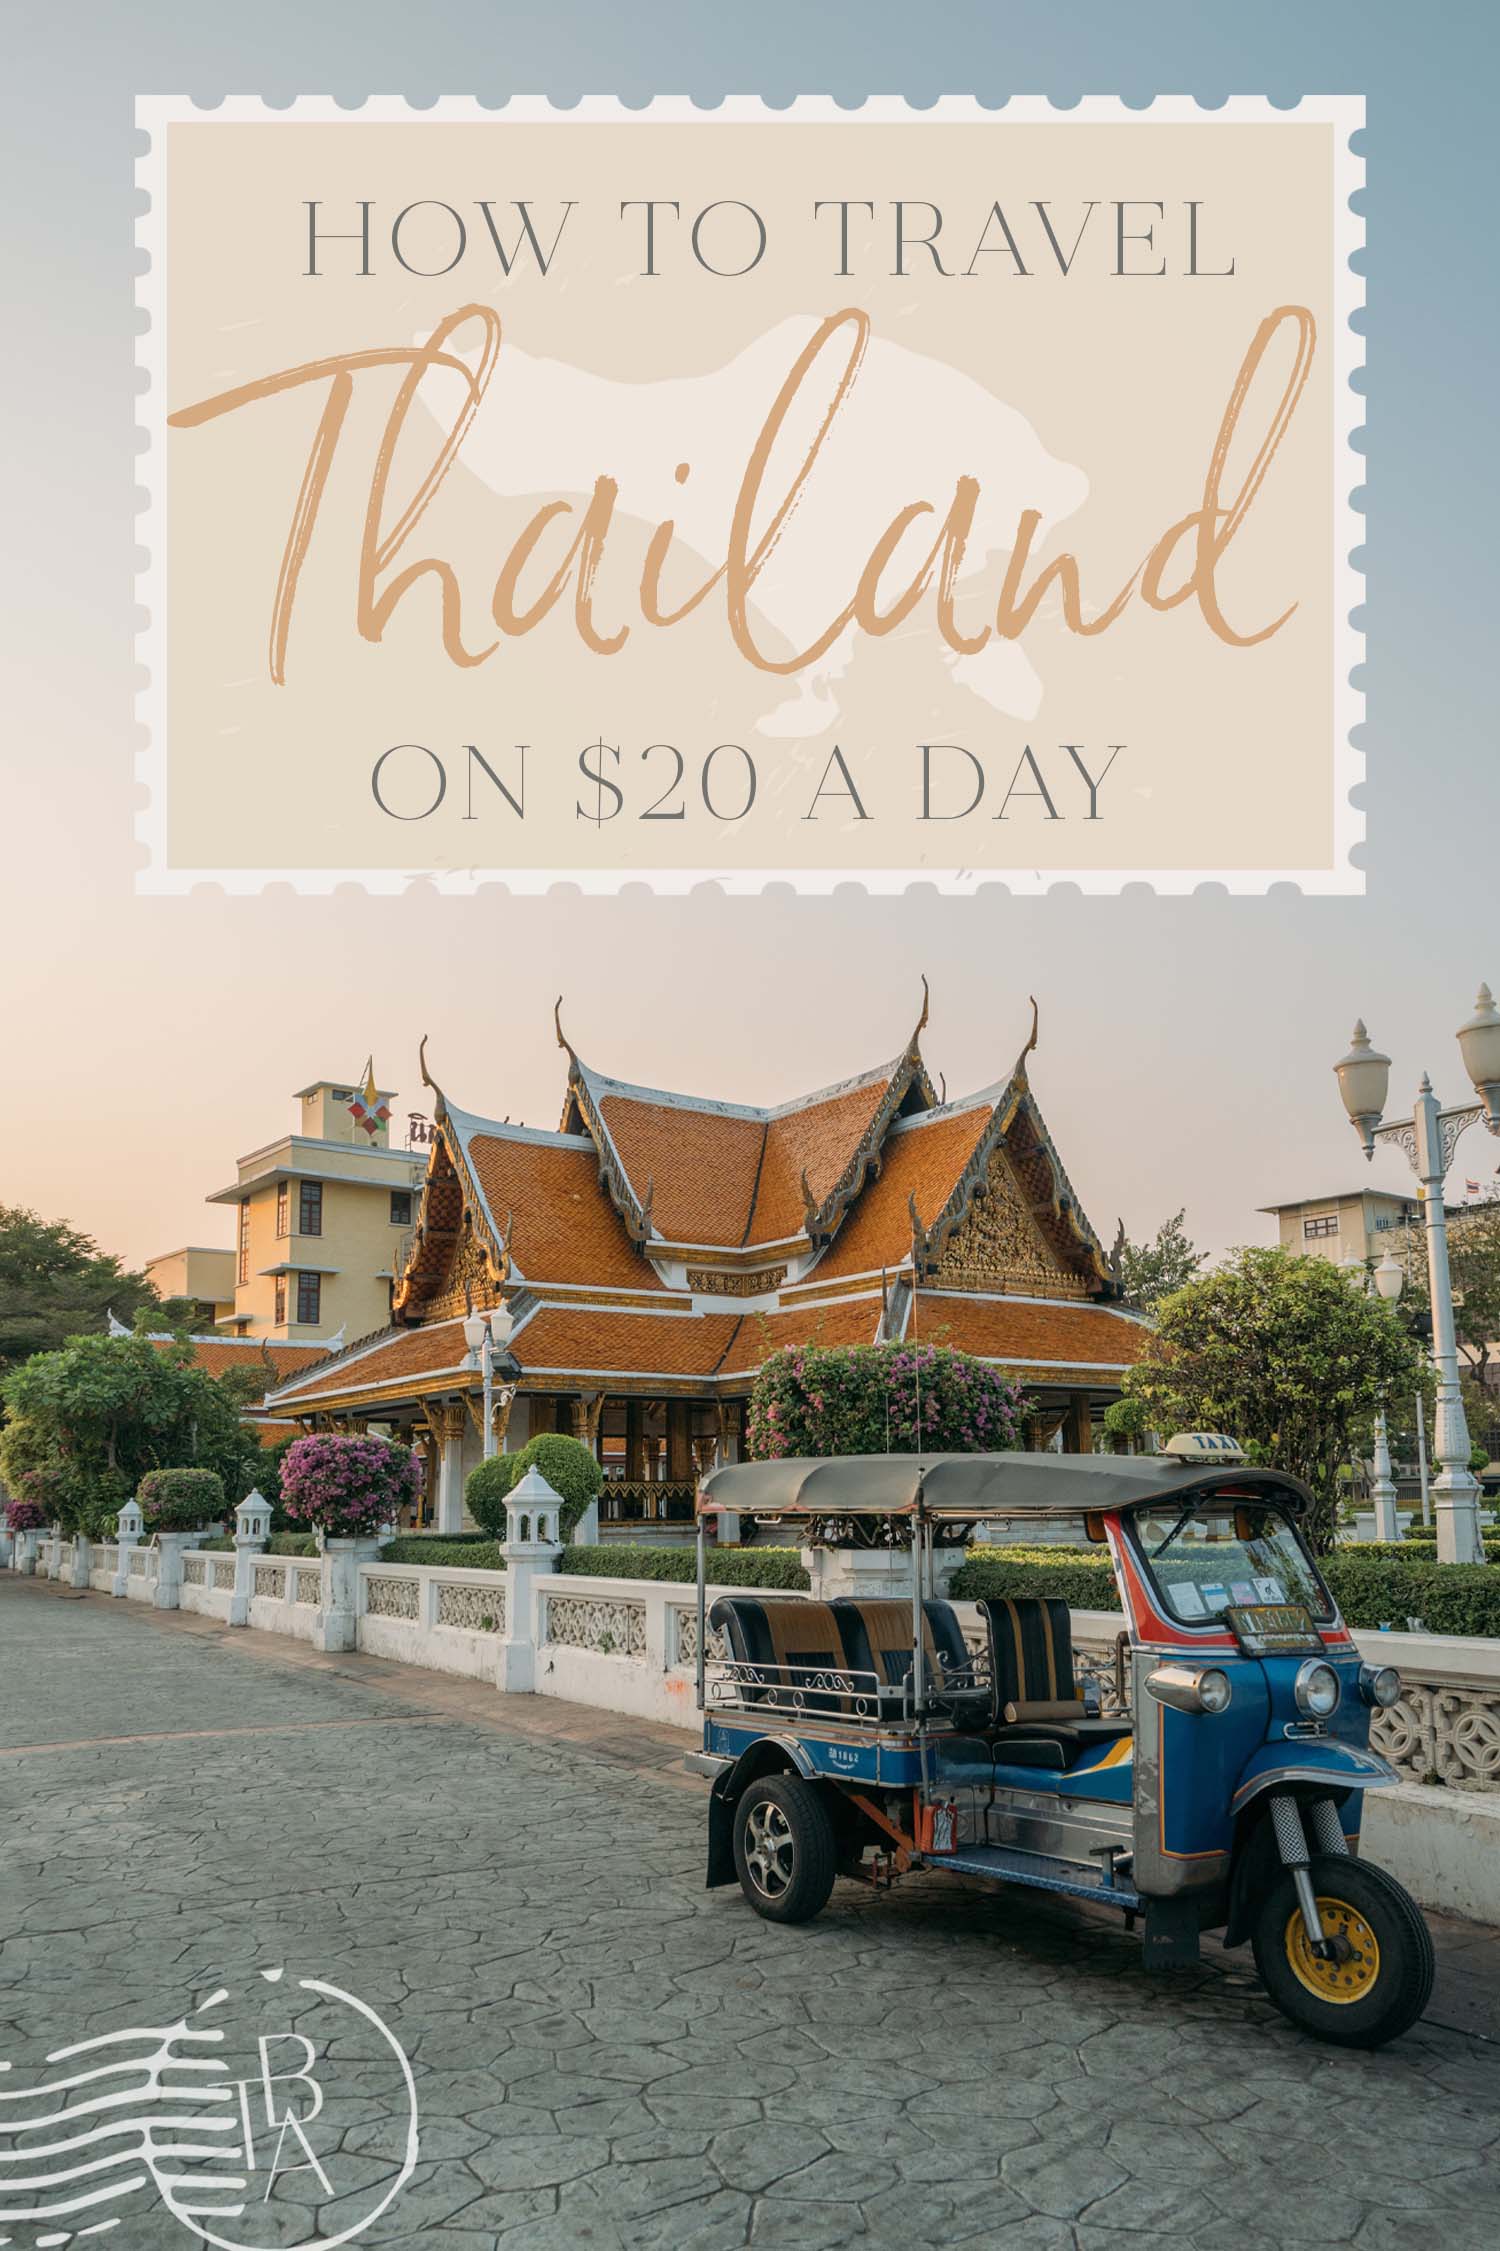 How to Travel Thailand on a Budget